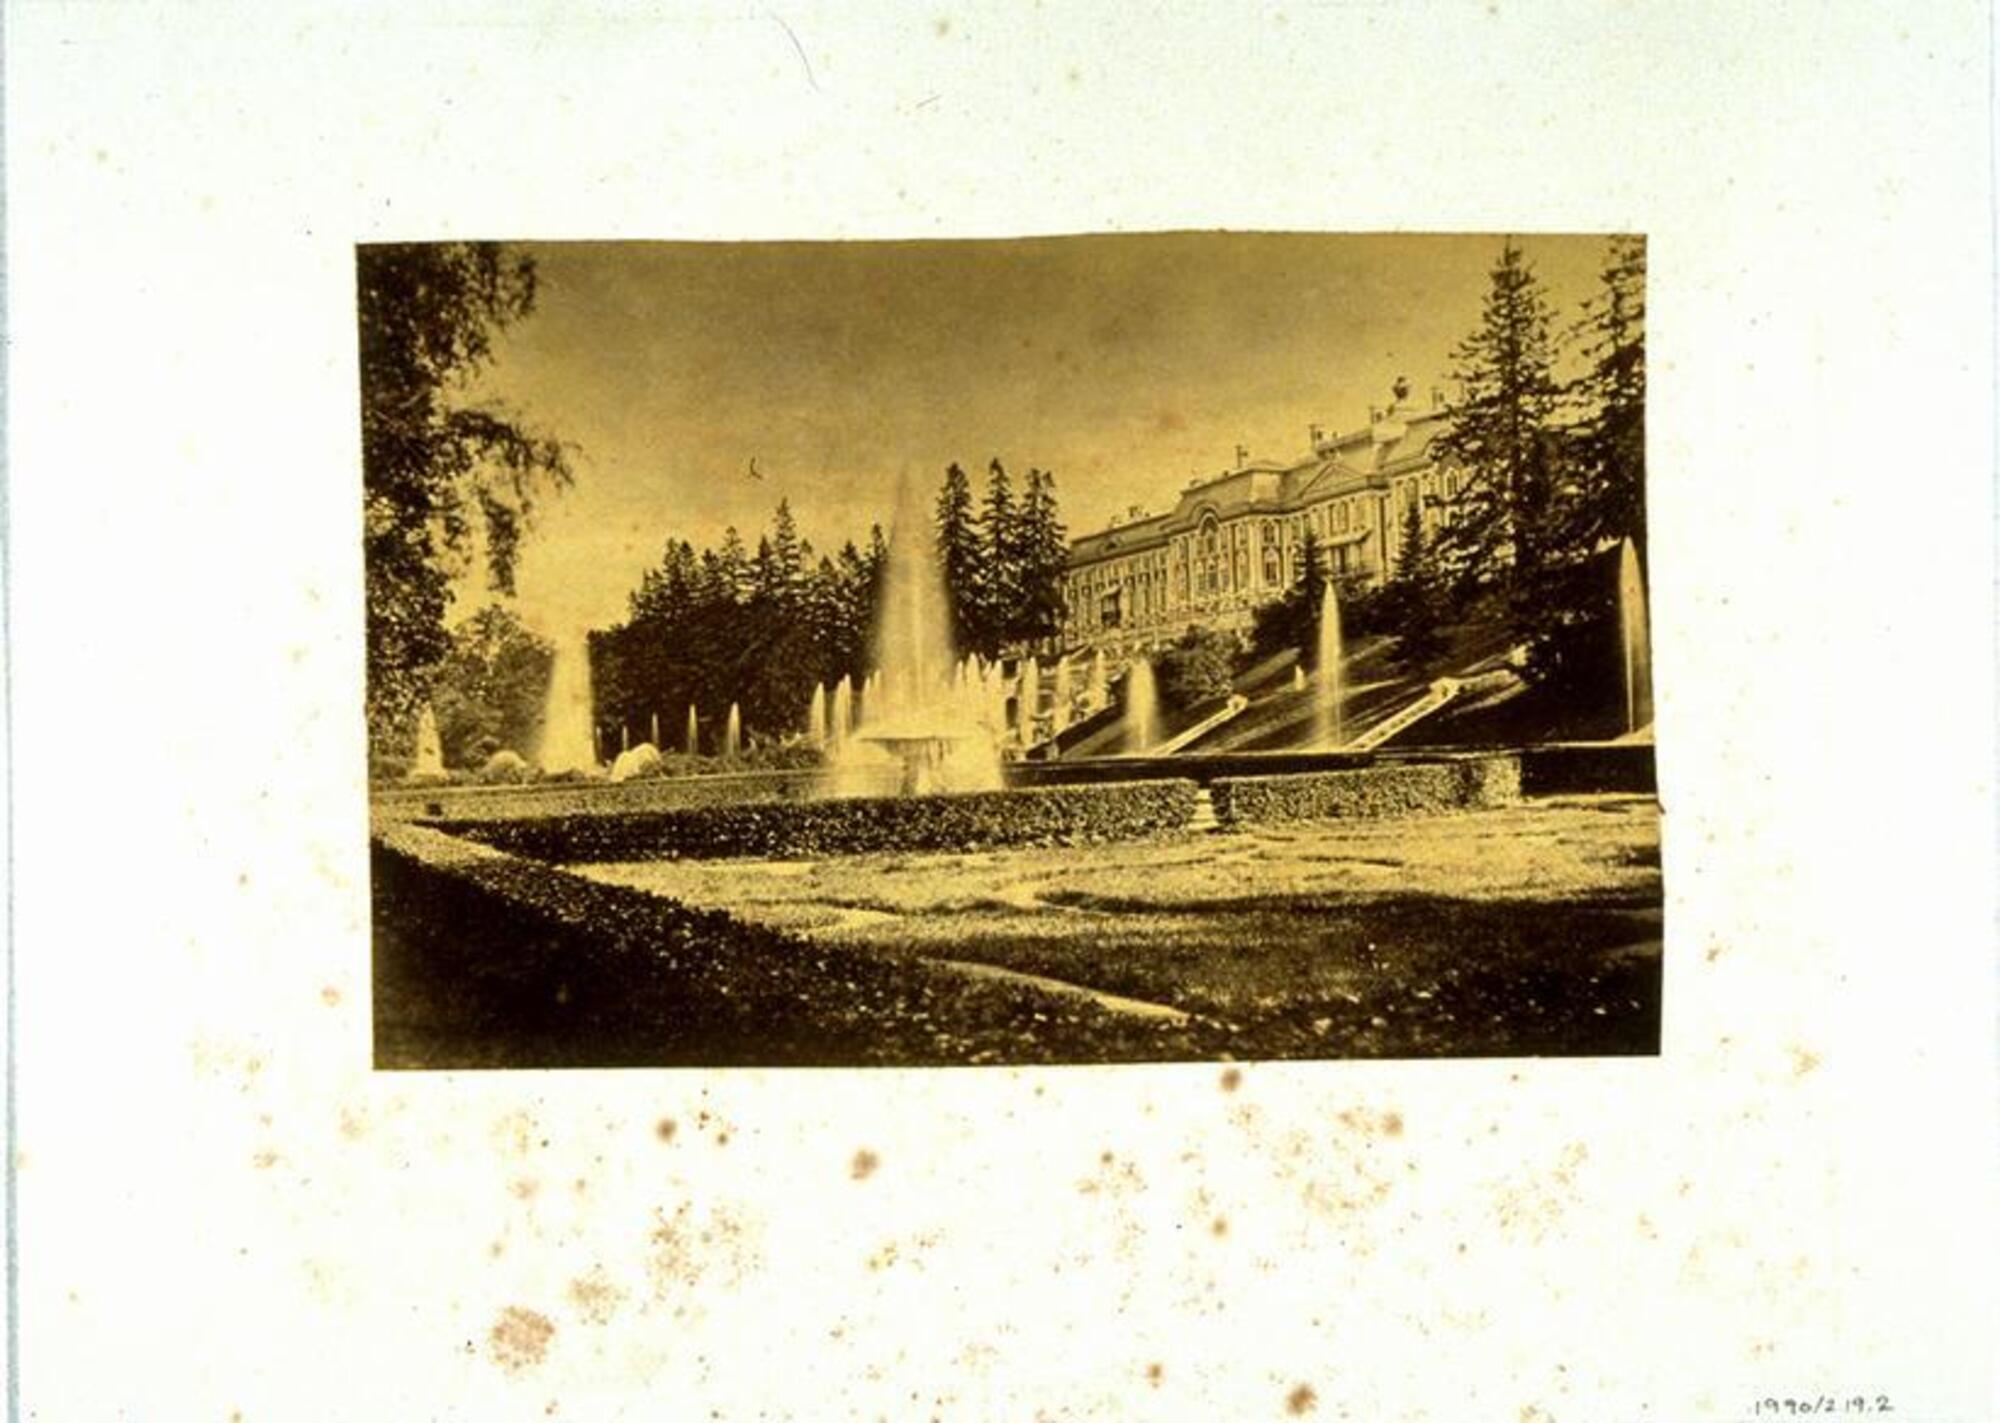 Photograph of Peterhof Palace and the Grand Cascade from an oblique view.